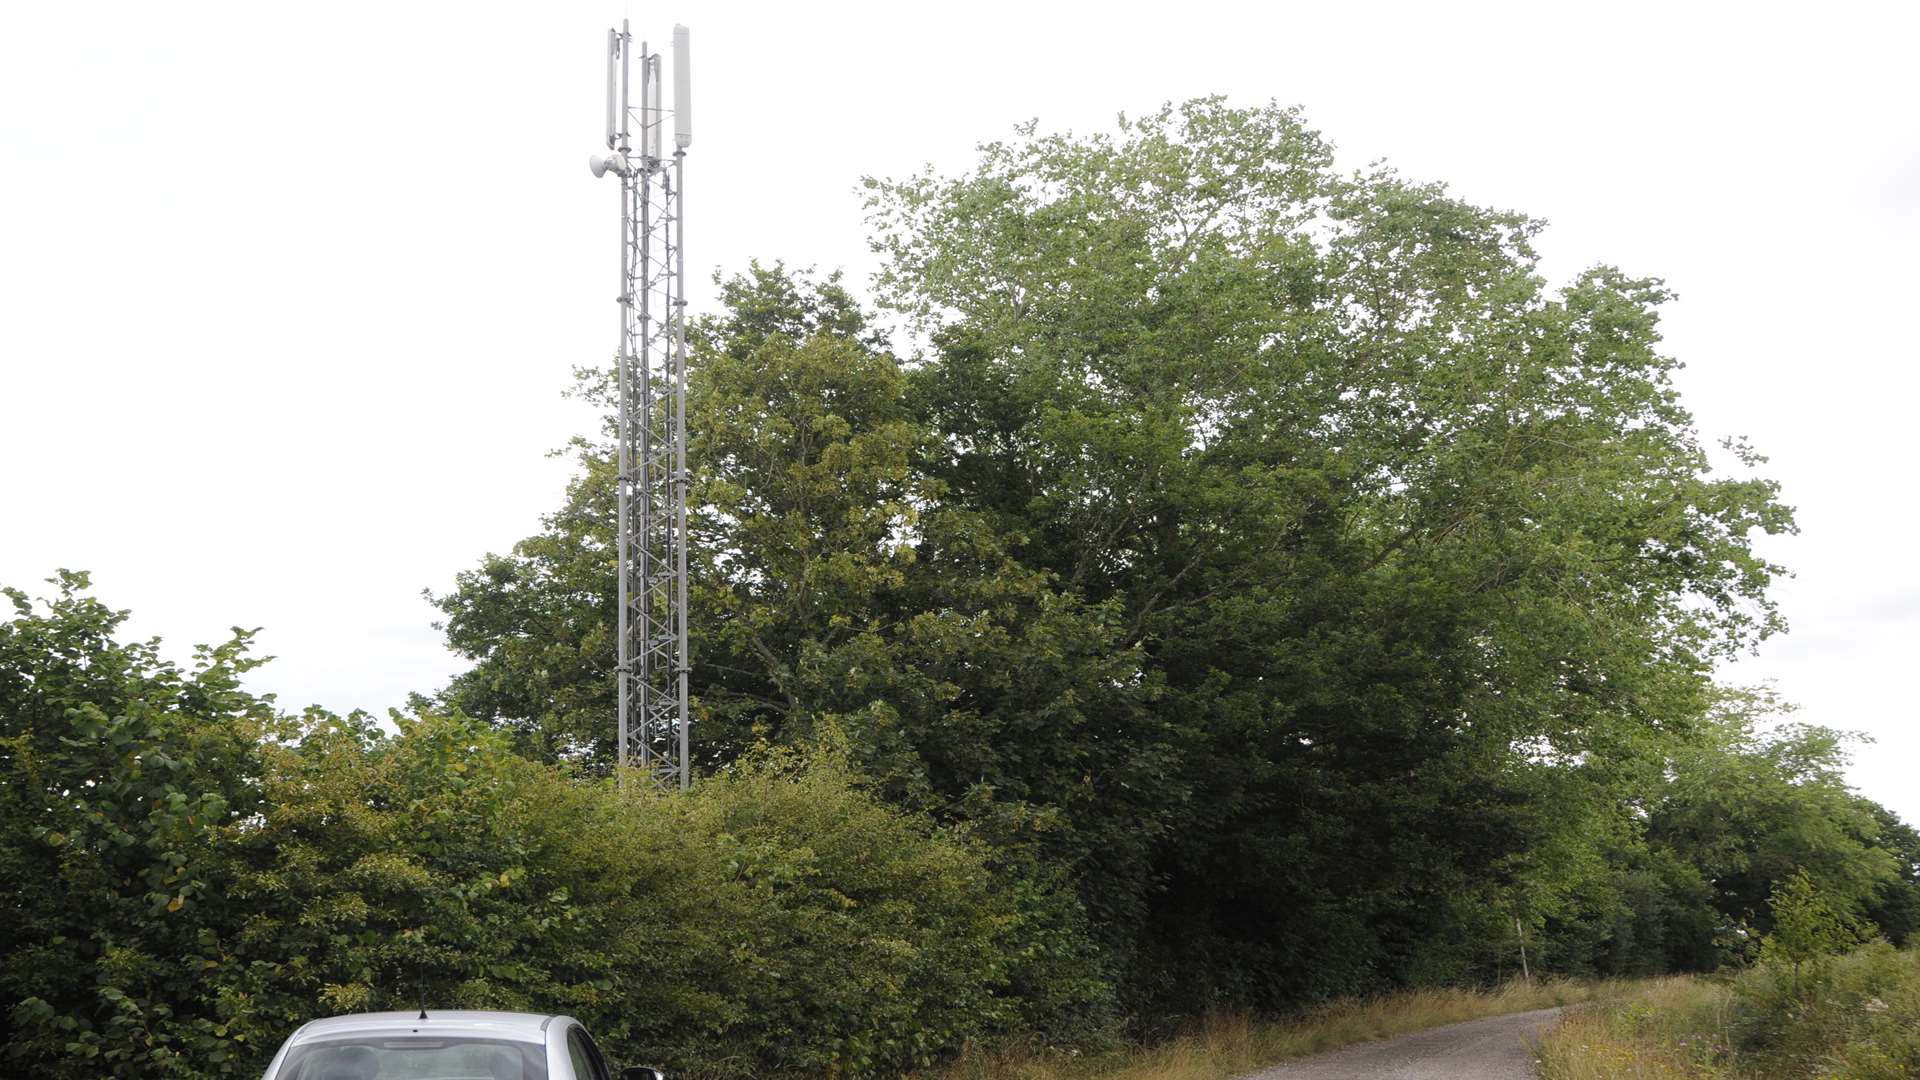 Planning constraints are putting the burners on much needed infrastructure in the Weald, according to O2